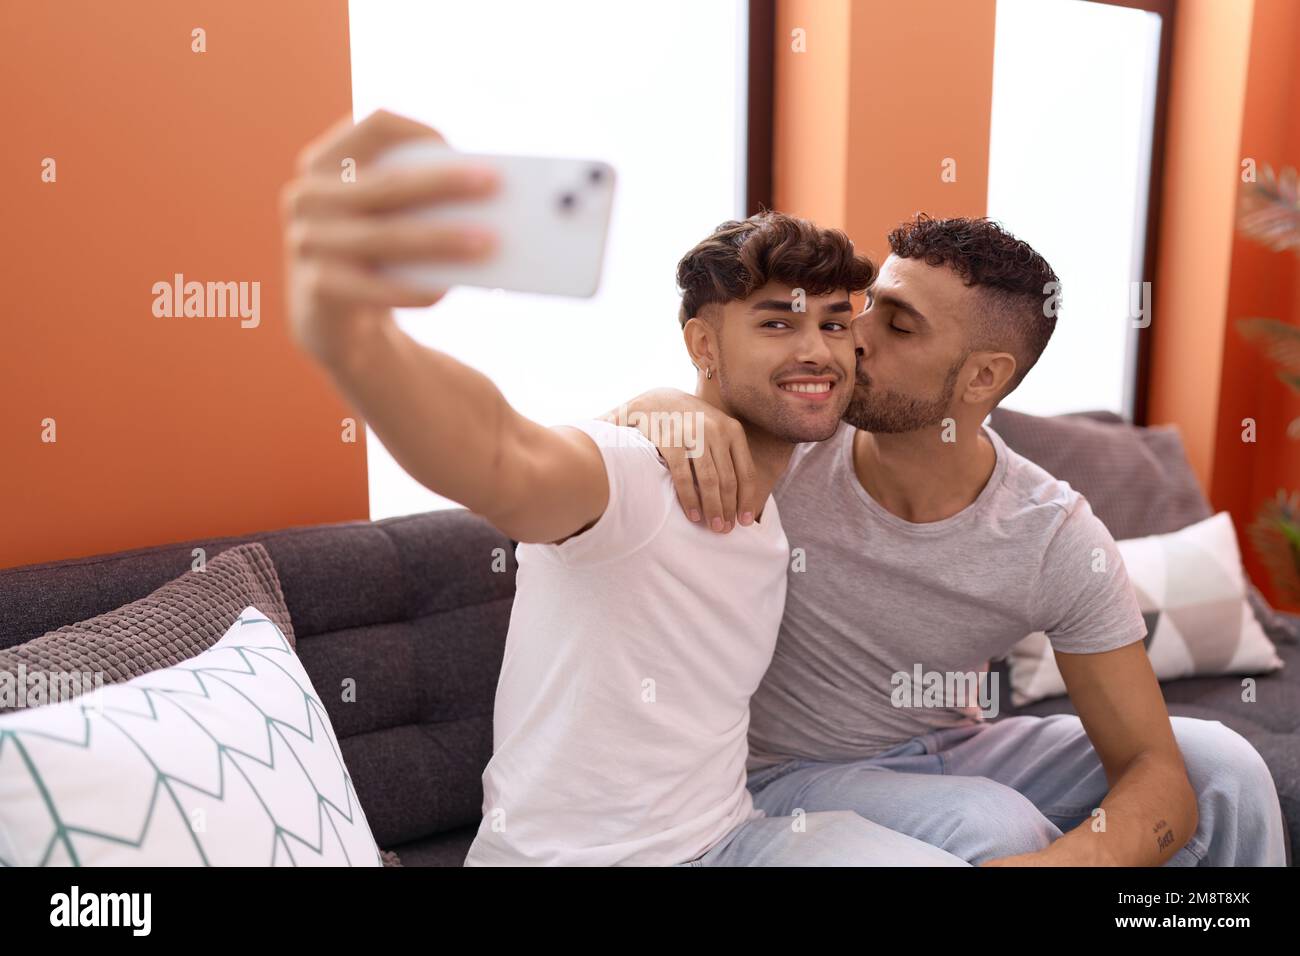 What are the best poses for selfies for guys? - Quora